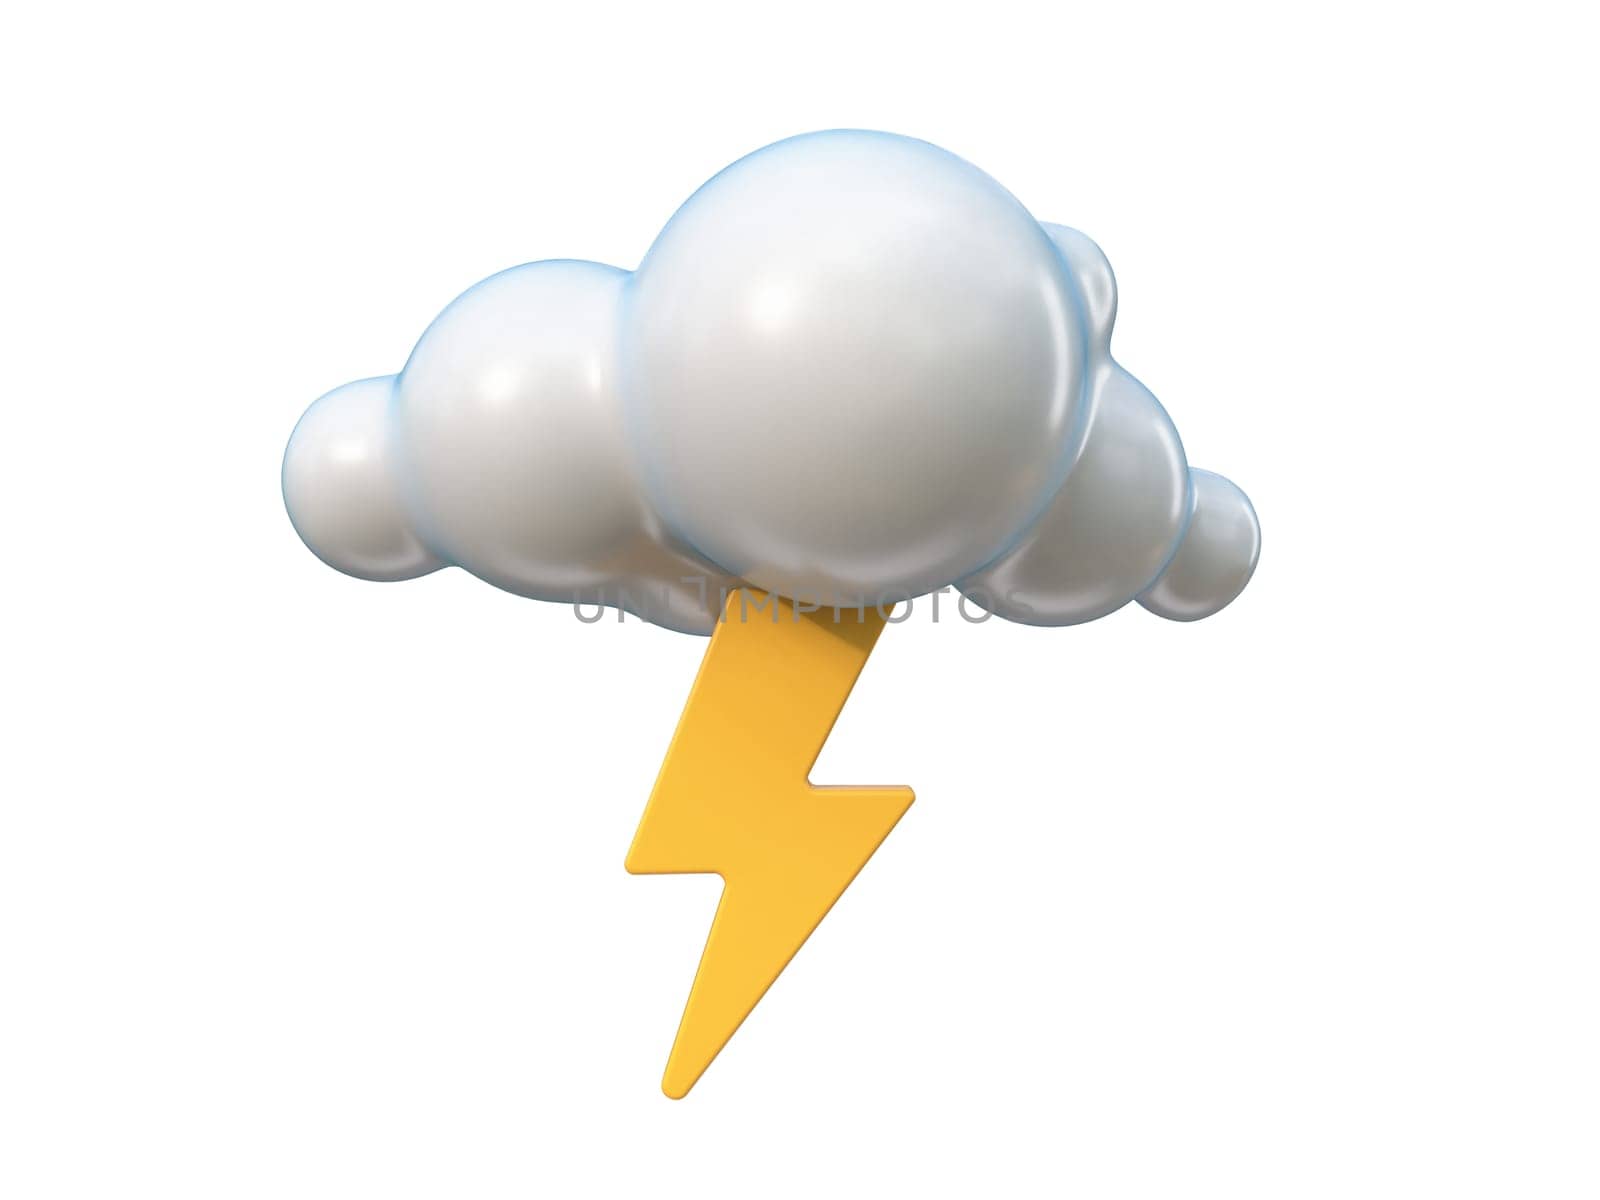 Weather icon Cloud with lightning 3D rendering illustration isolated on white background